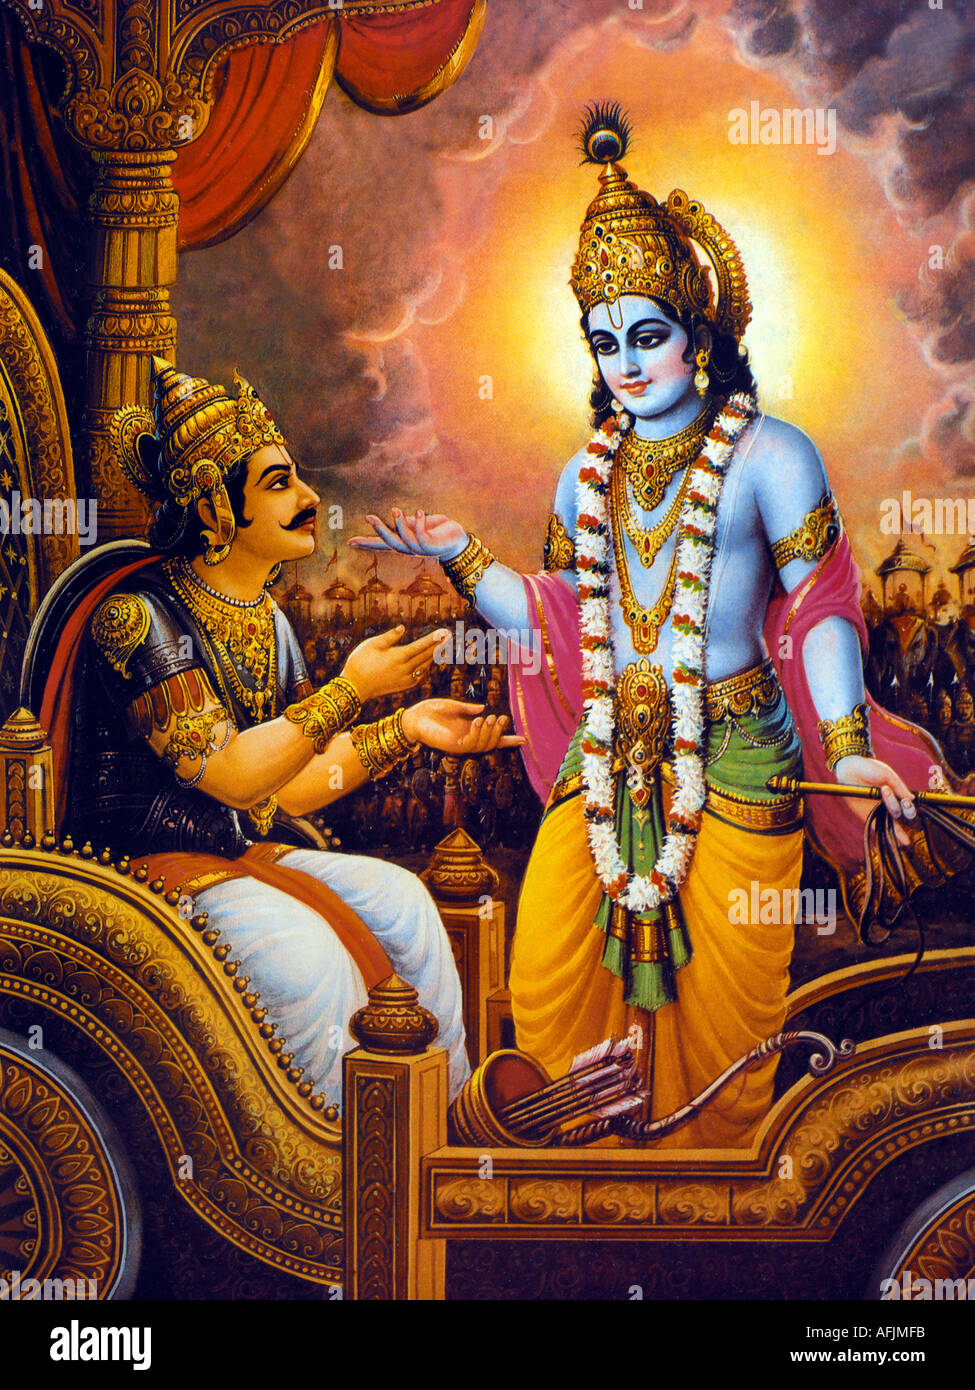 Stunning Compilation of Full 4K Krishna Arjun Images: Over 999 Pictures